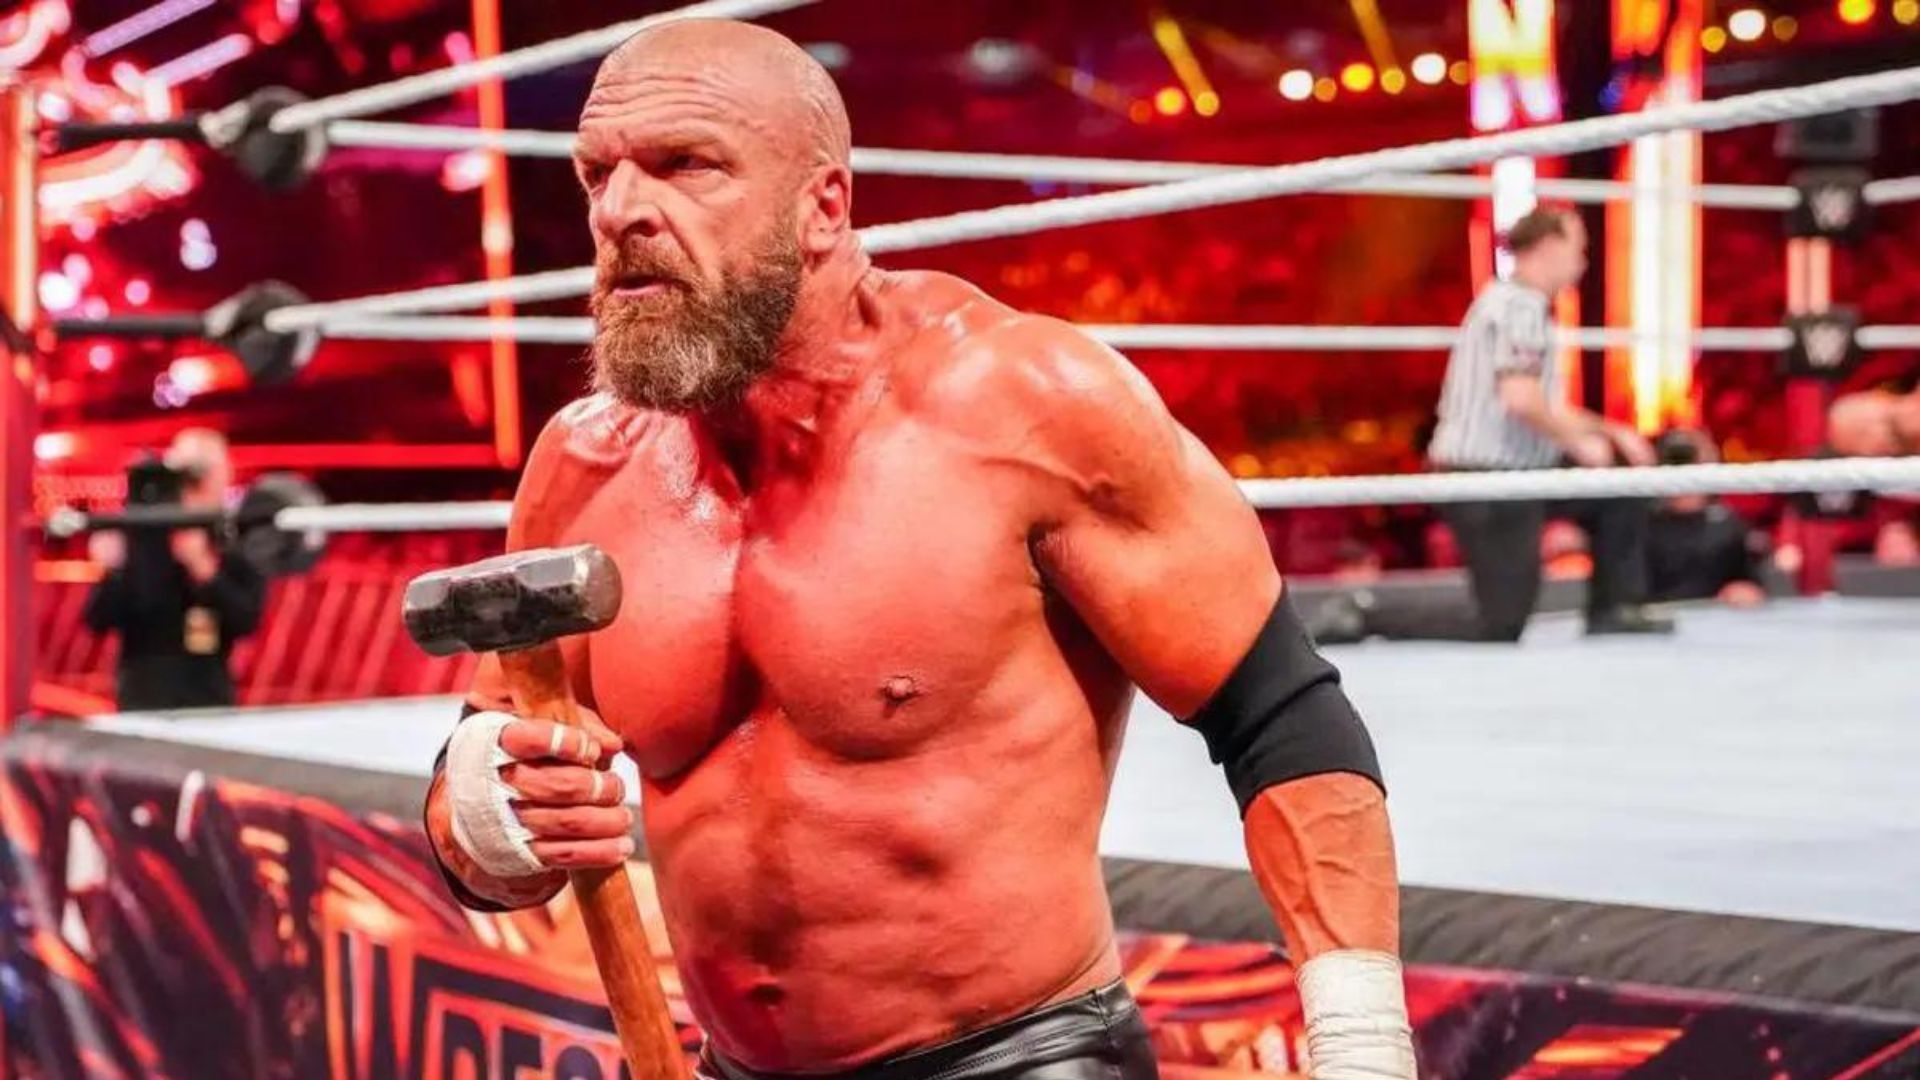 Triple H retired from in-ring action after his cardiac issues